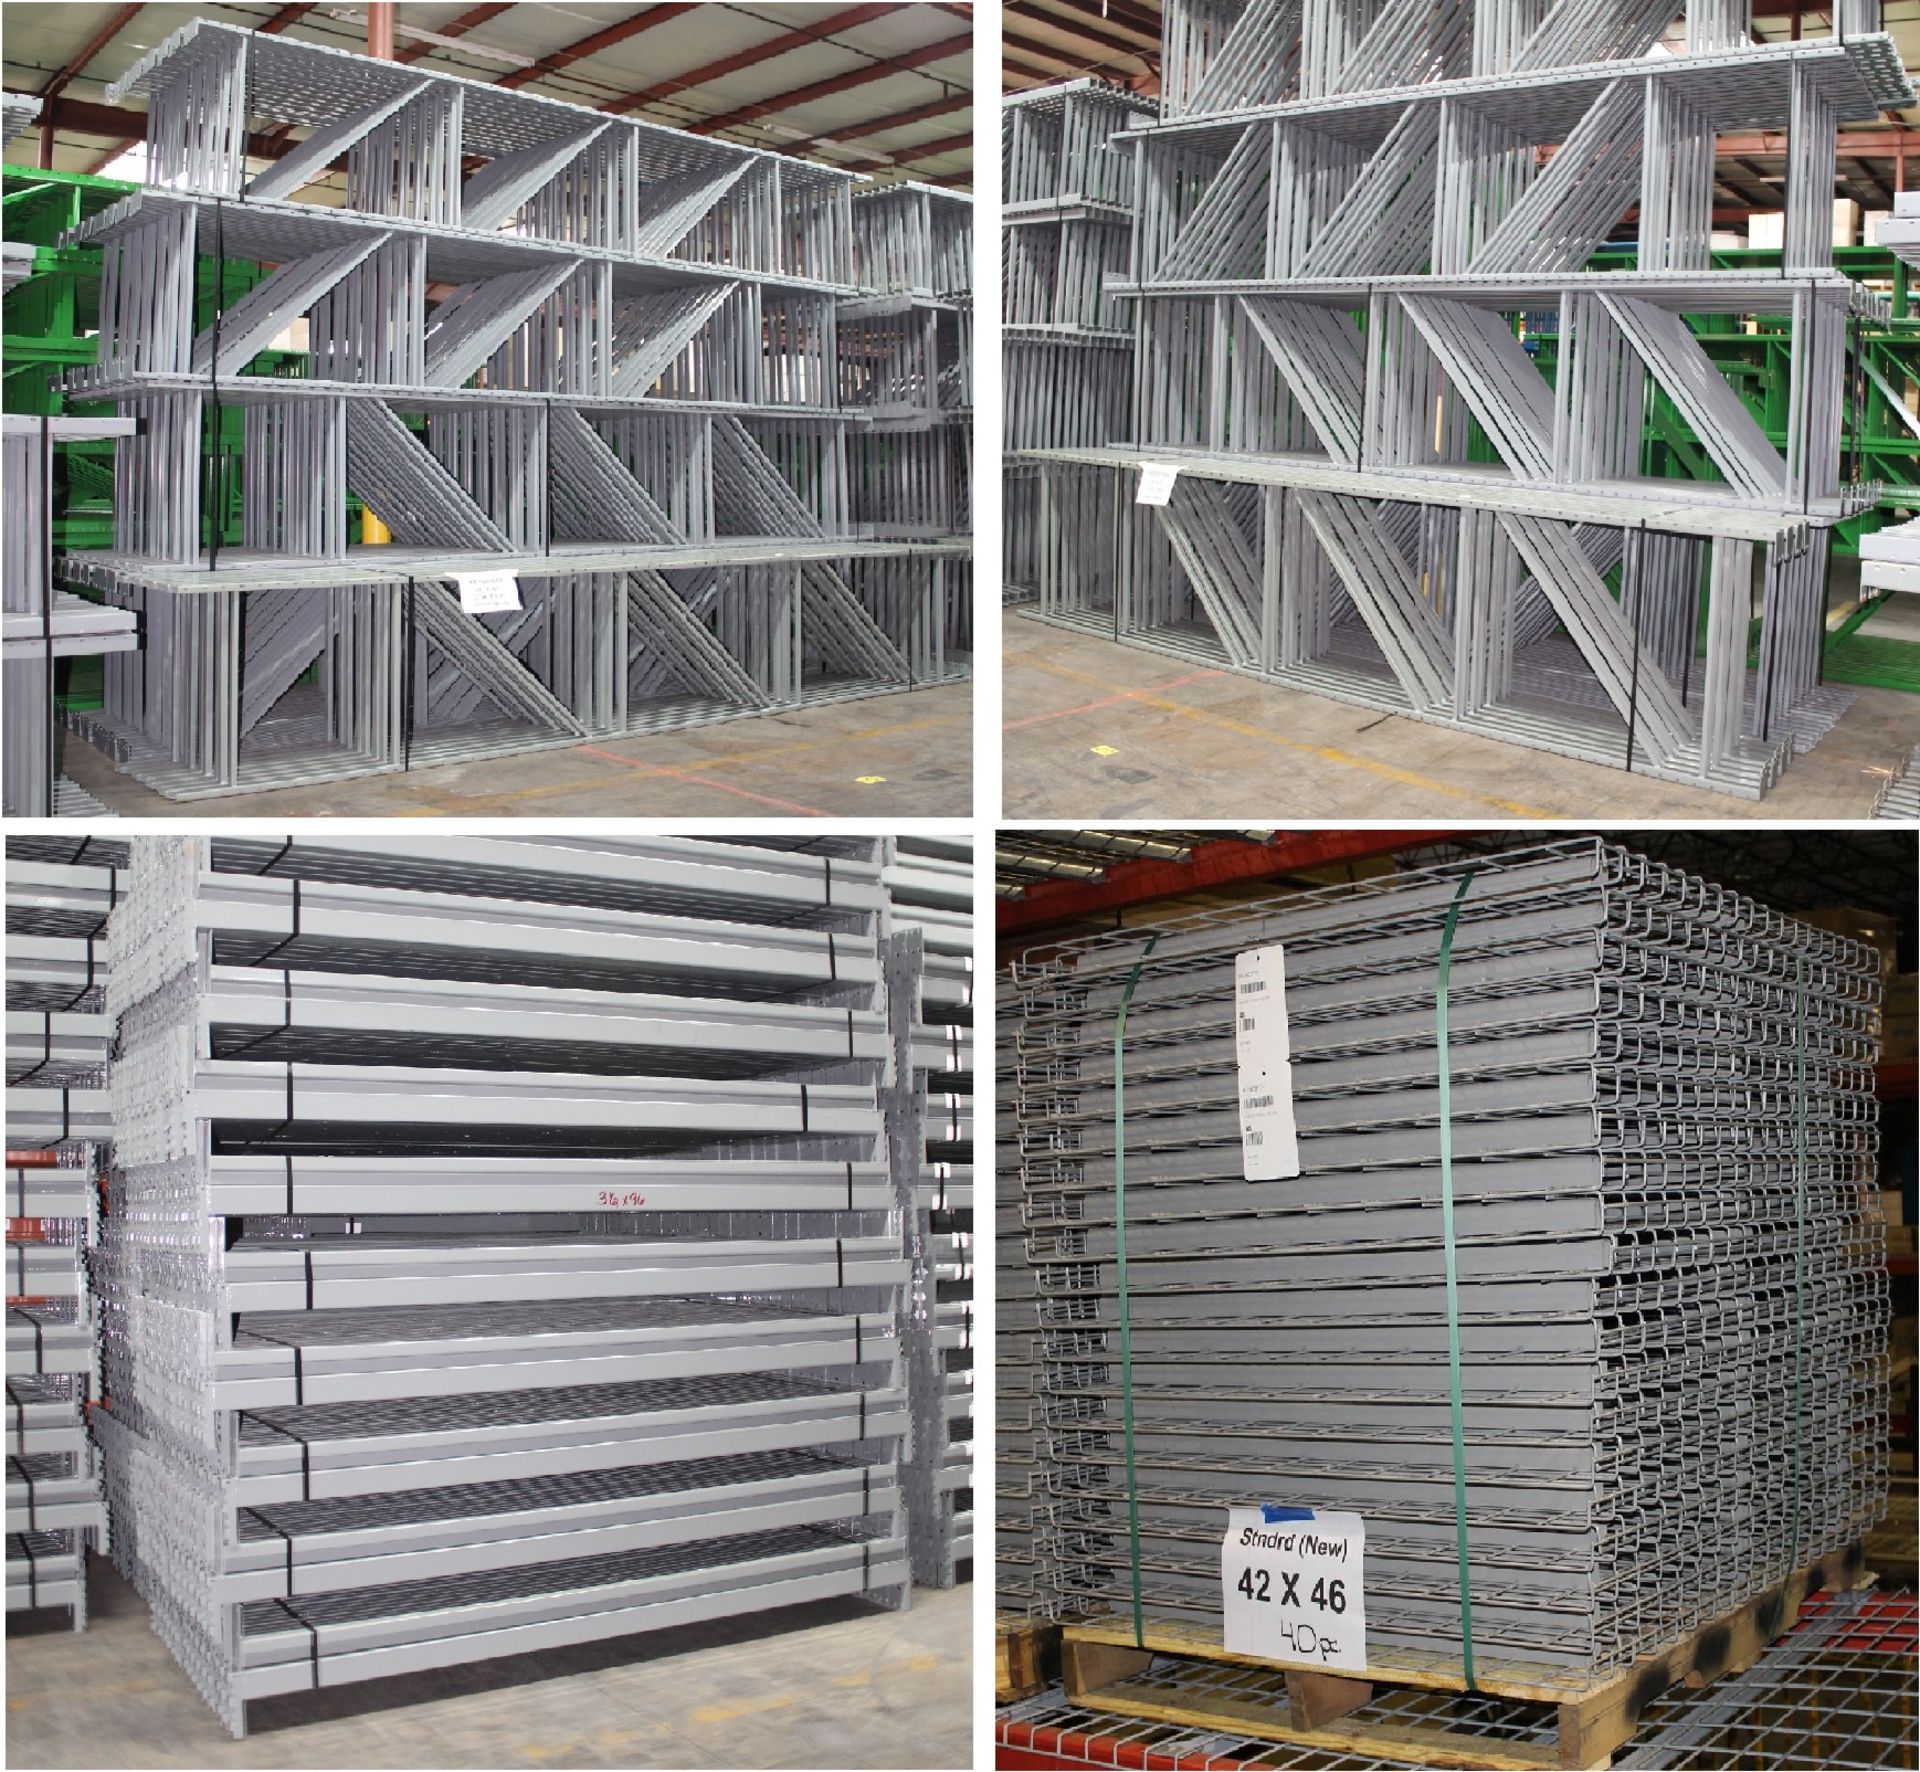 LIKE NEW KEYSTONE STYLE PALLET RACK WITH BEAMS AND WIRE DECKING. SIZE: 192"H X 96"L X 42"D.